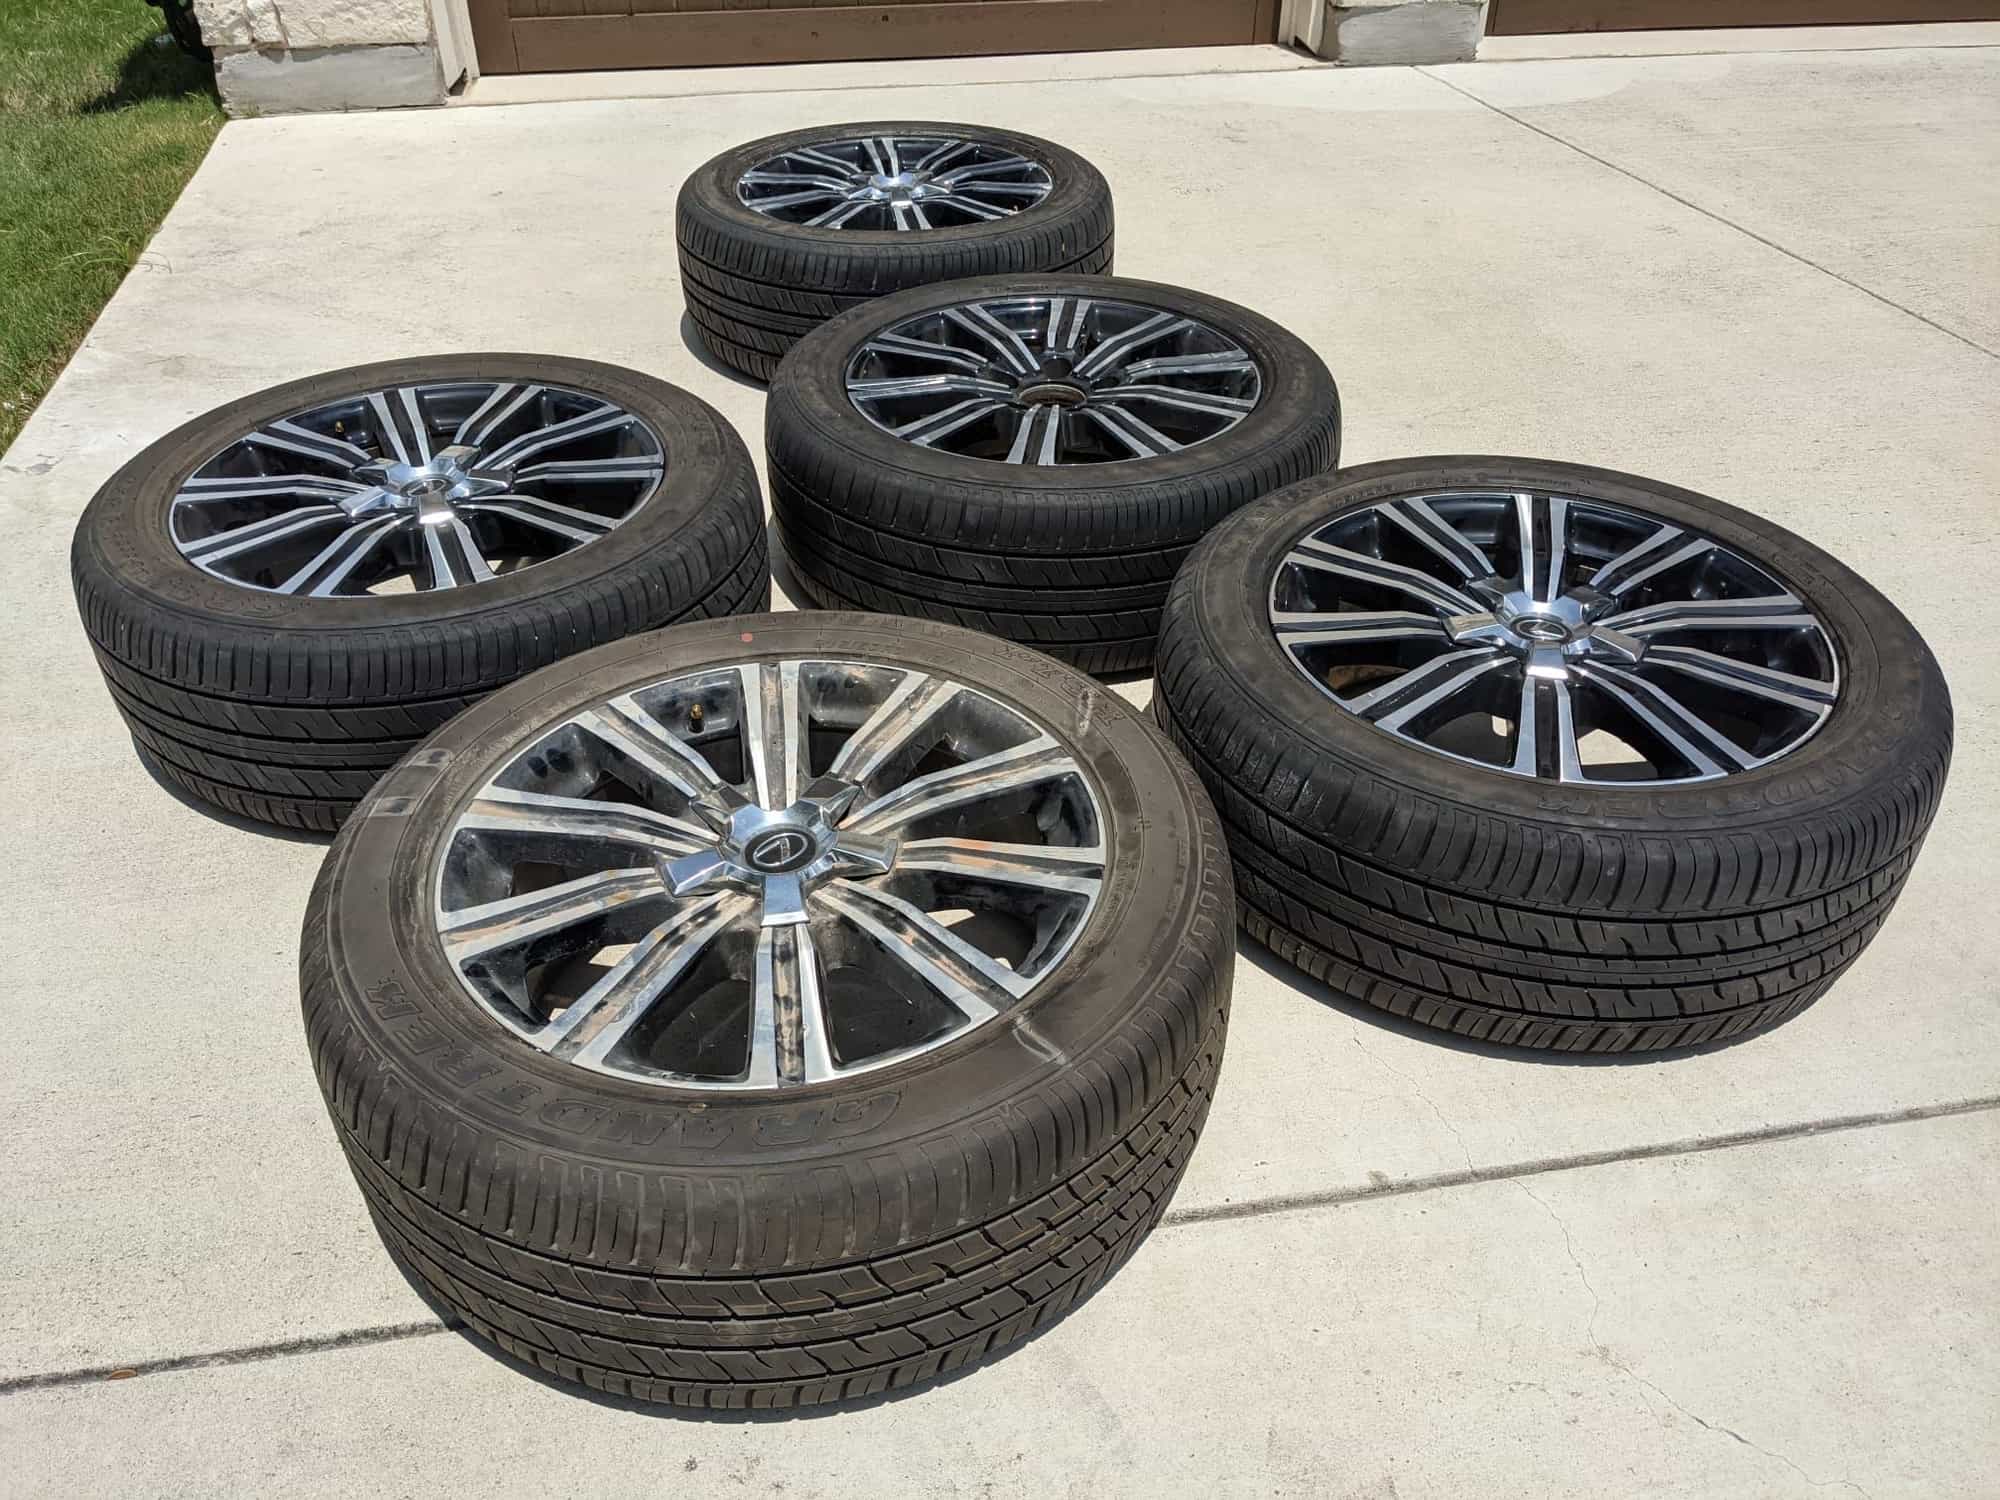 Wheels and Tires/Axles - Lx570 21" OEM wheels and tires - Used - 2016 to 2021 Lexus LX570 - Round Rock, TX 78665, United States